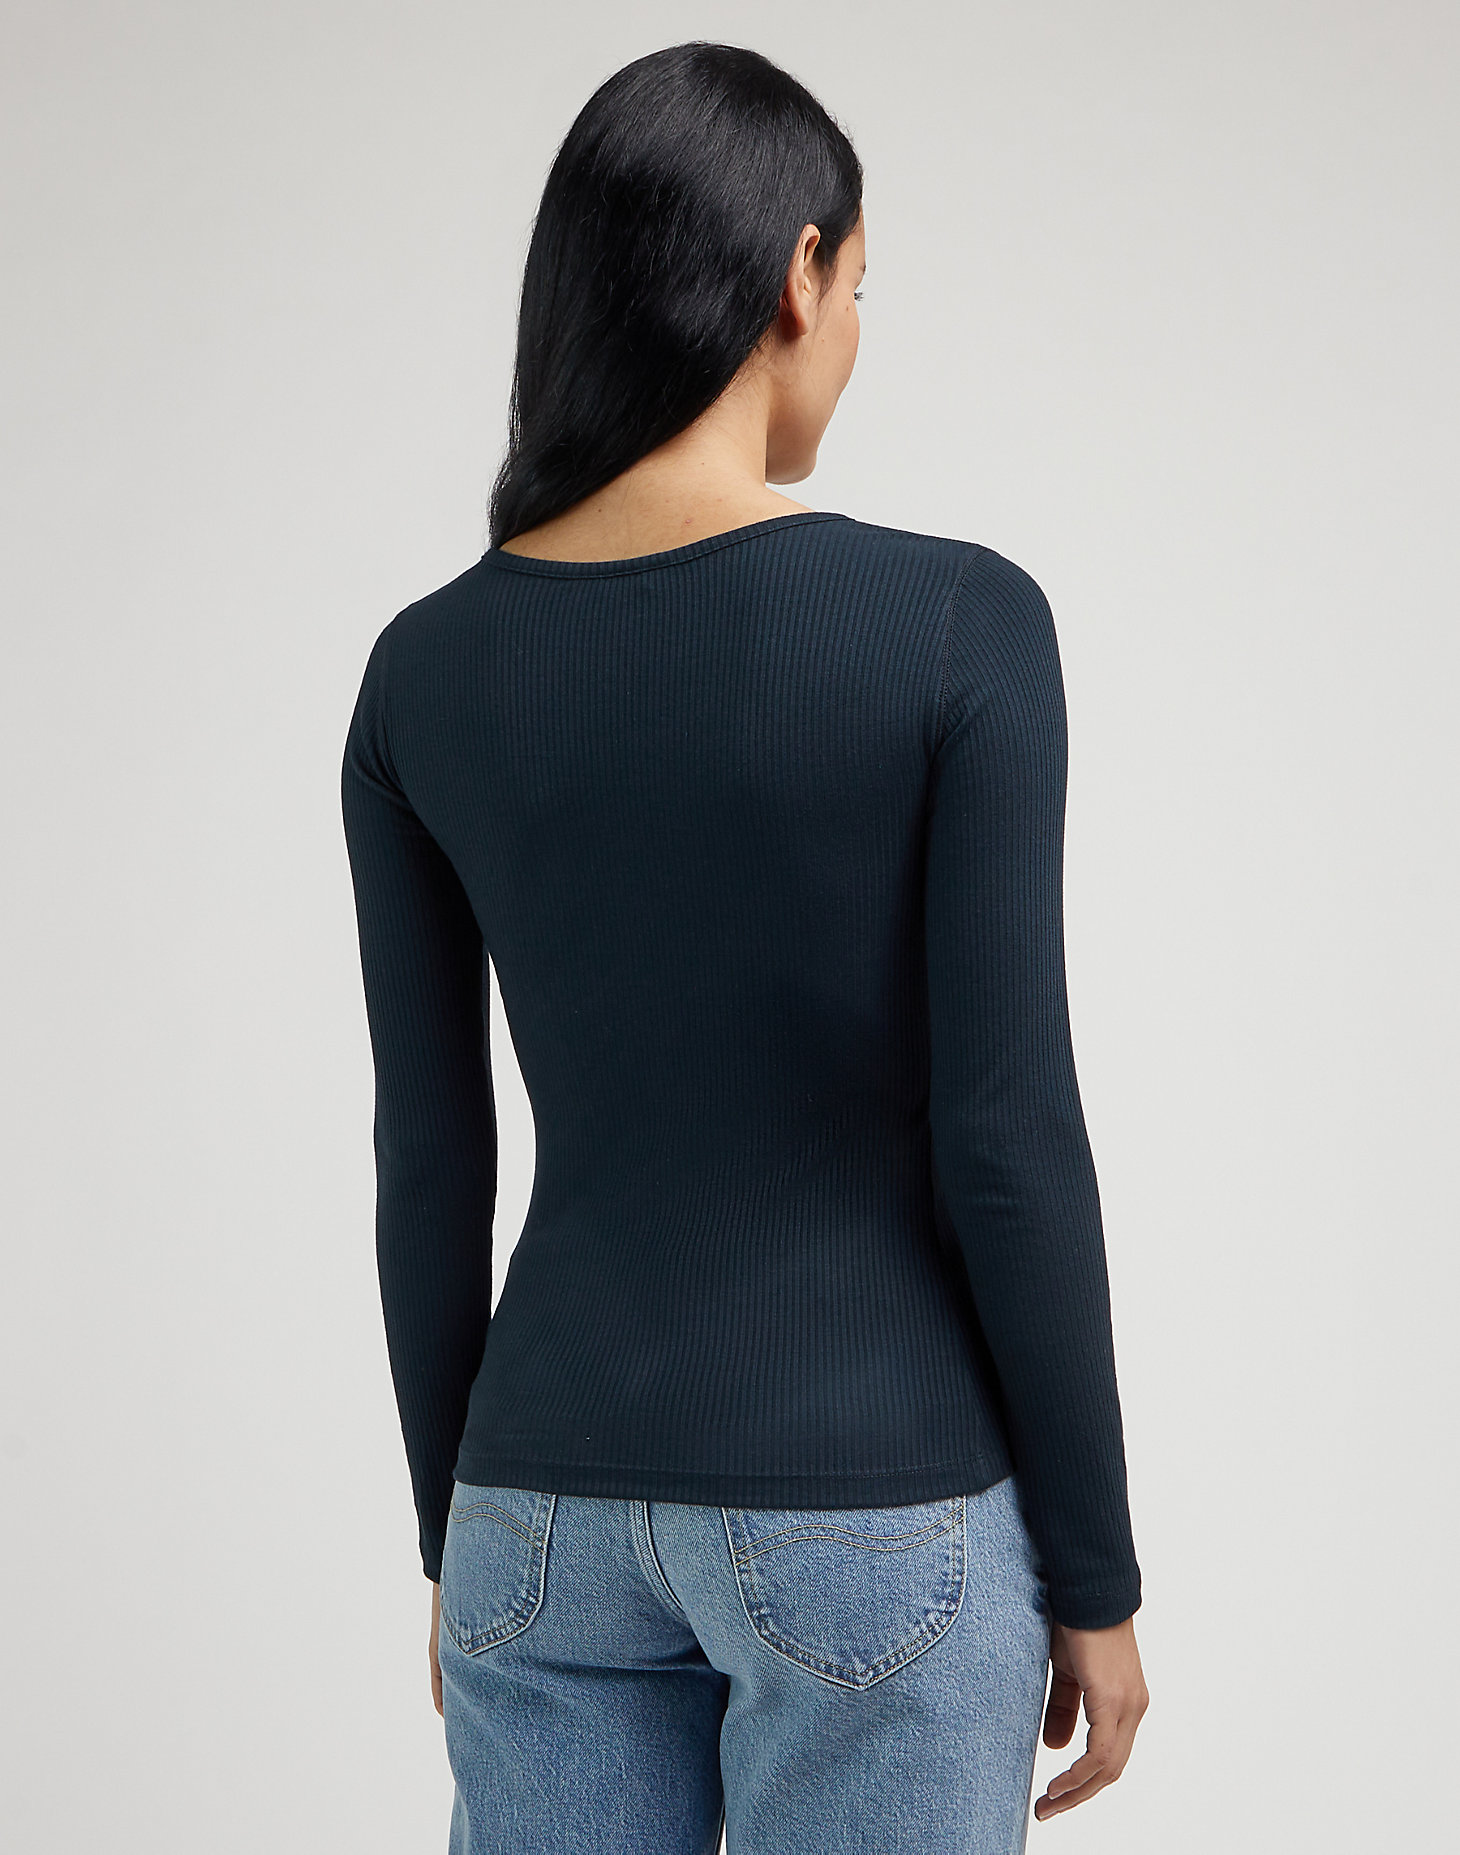 Ribbed Long Sleeve Henley in Unionall Blk alternative view 1